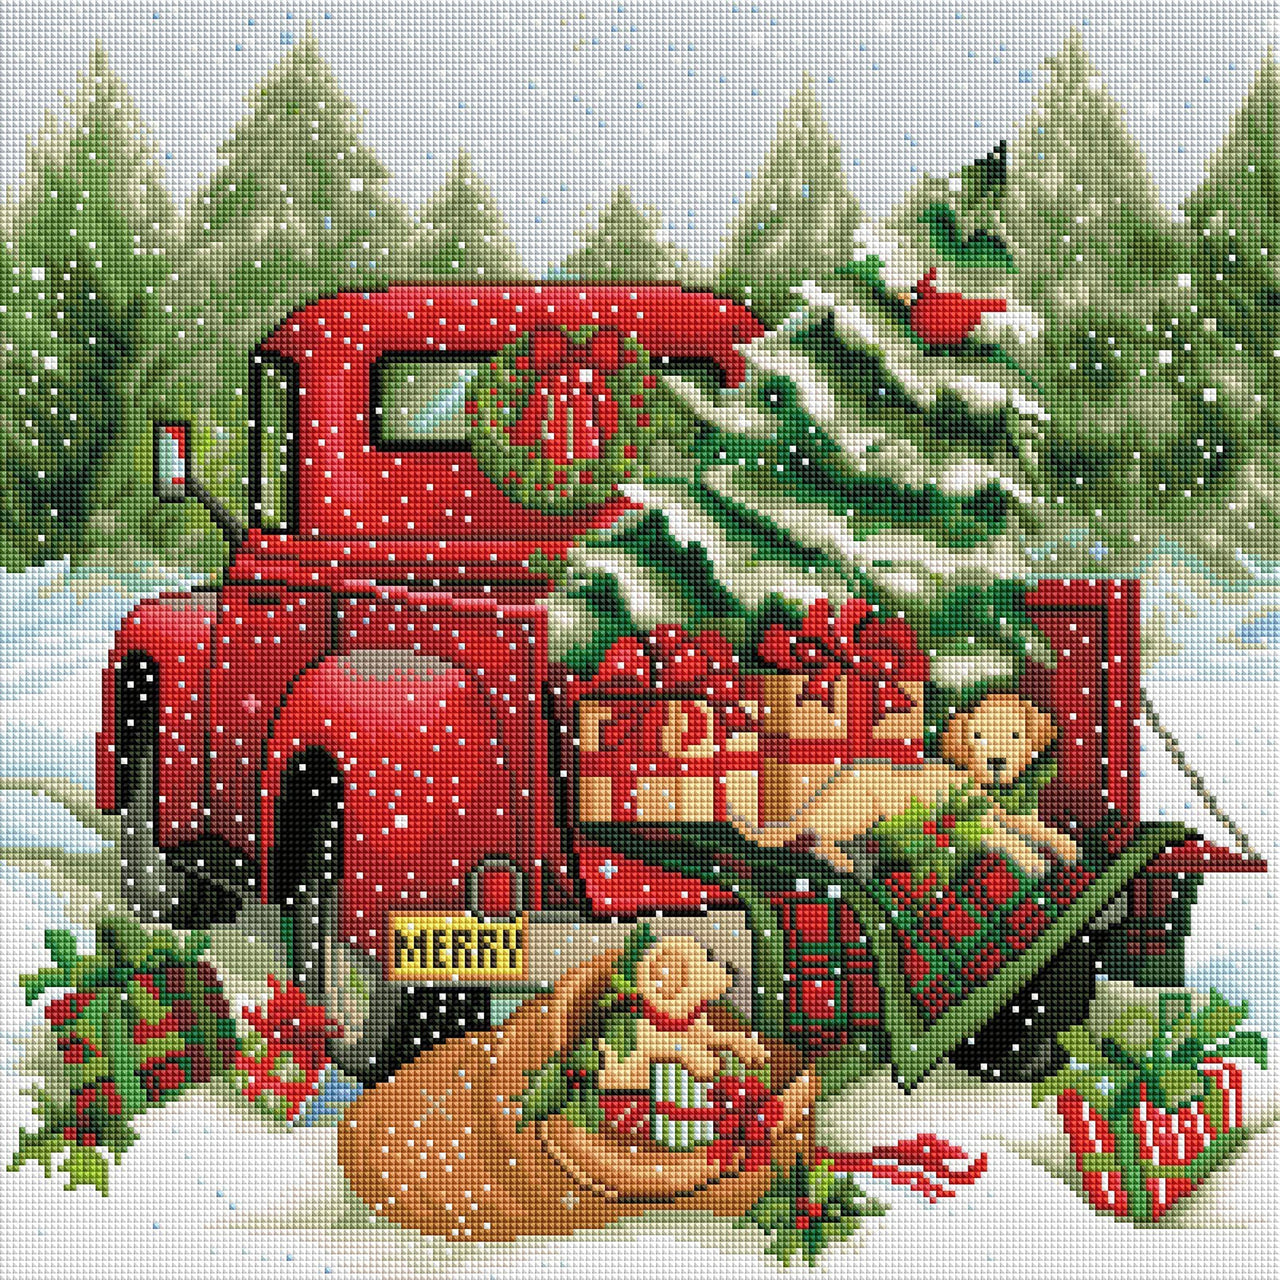 Diamond Painting Christmas Delivery 20" x 20″ (51cm x 51cm) / Square with 47 Colors including 4 ABs / 40,401